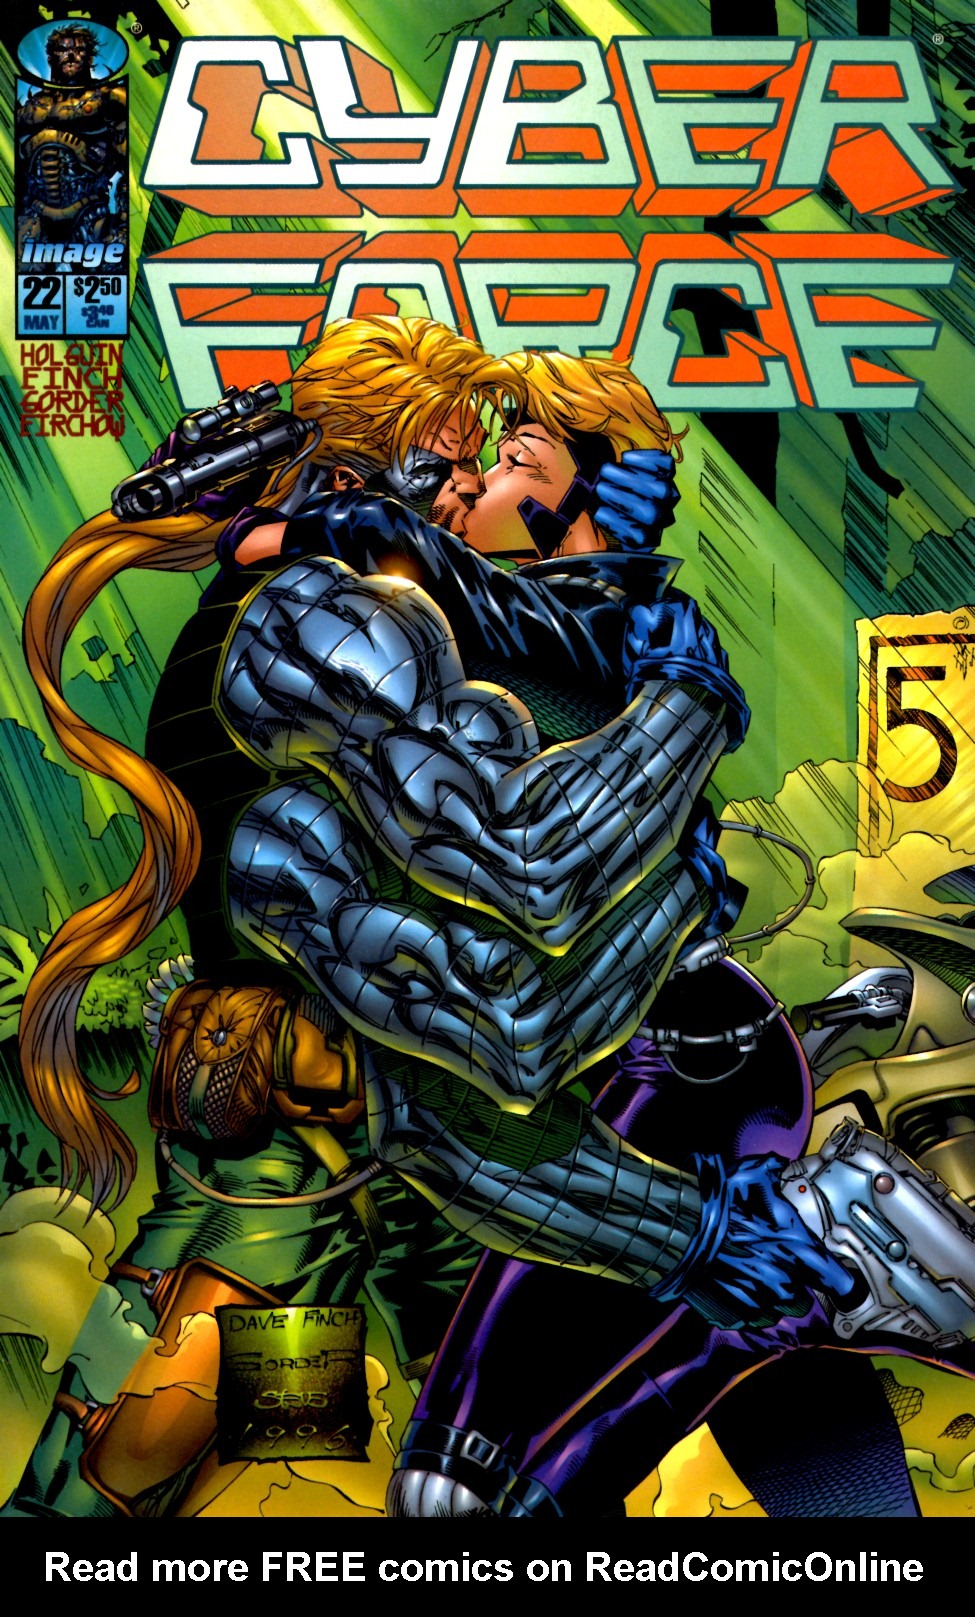 Cyberforce (1993) Issue #22 #22 - English 1